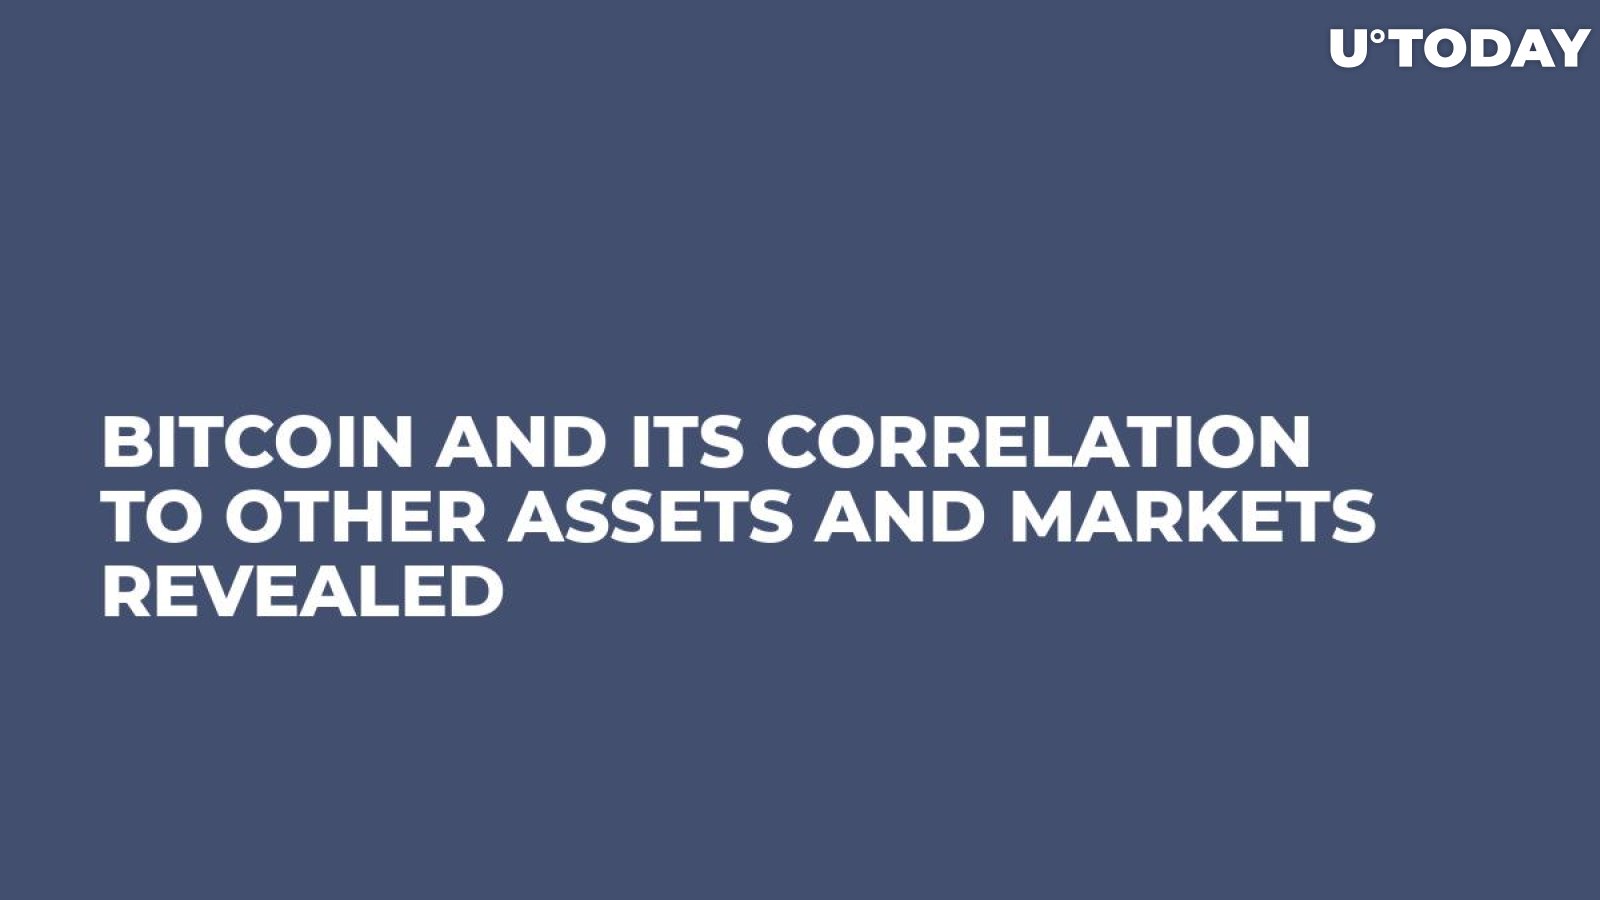 Bitcoin and Its Correlation to Other Assets and Markets Revealed